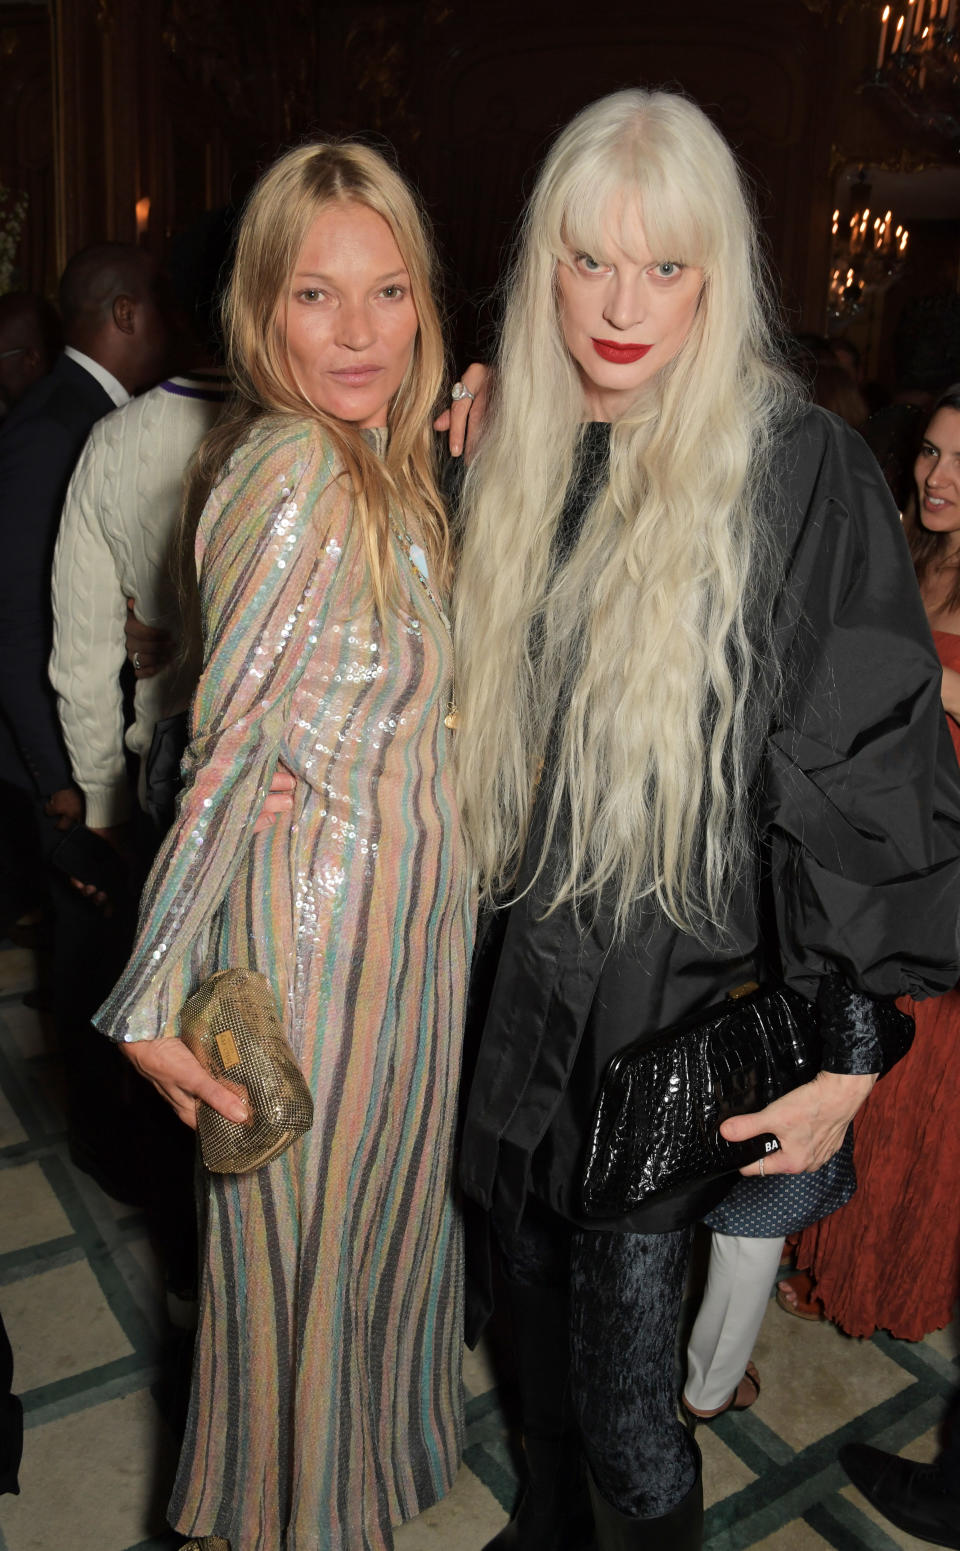 LONDON, ENGLAND - SEPTEMBER 04: Kate Moss and Kristen McMenamy attend a celebration of Edward Enninful's new memoir "A Visible Man" at Claridge's Hotel on September 4, 2022 in London, England. (Photo by David M. Benett/Dave Benett/Getty Images)